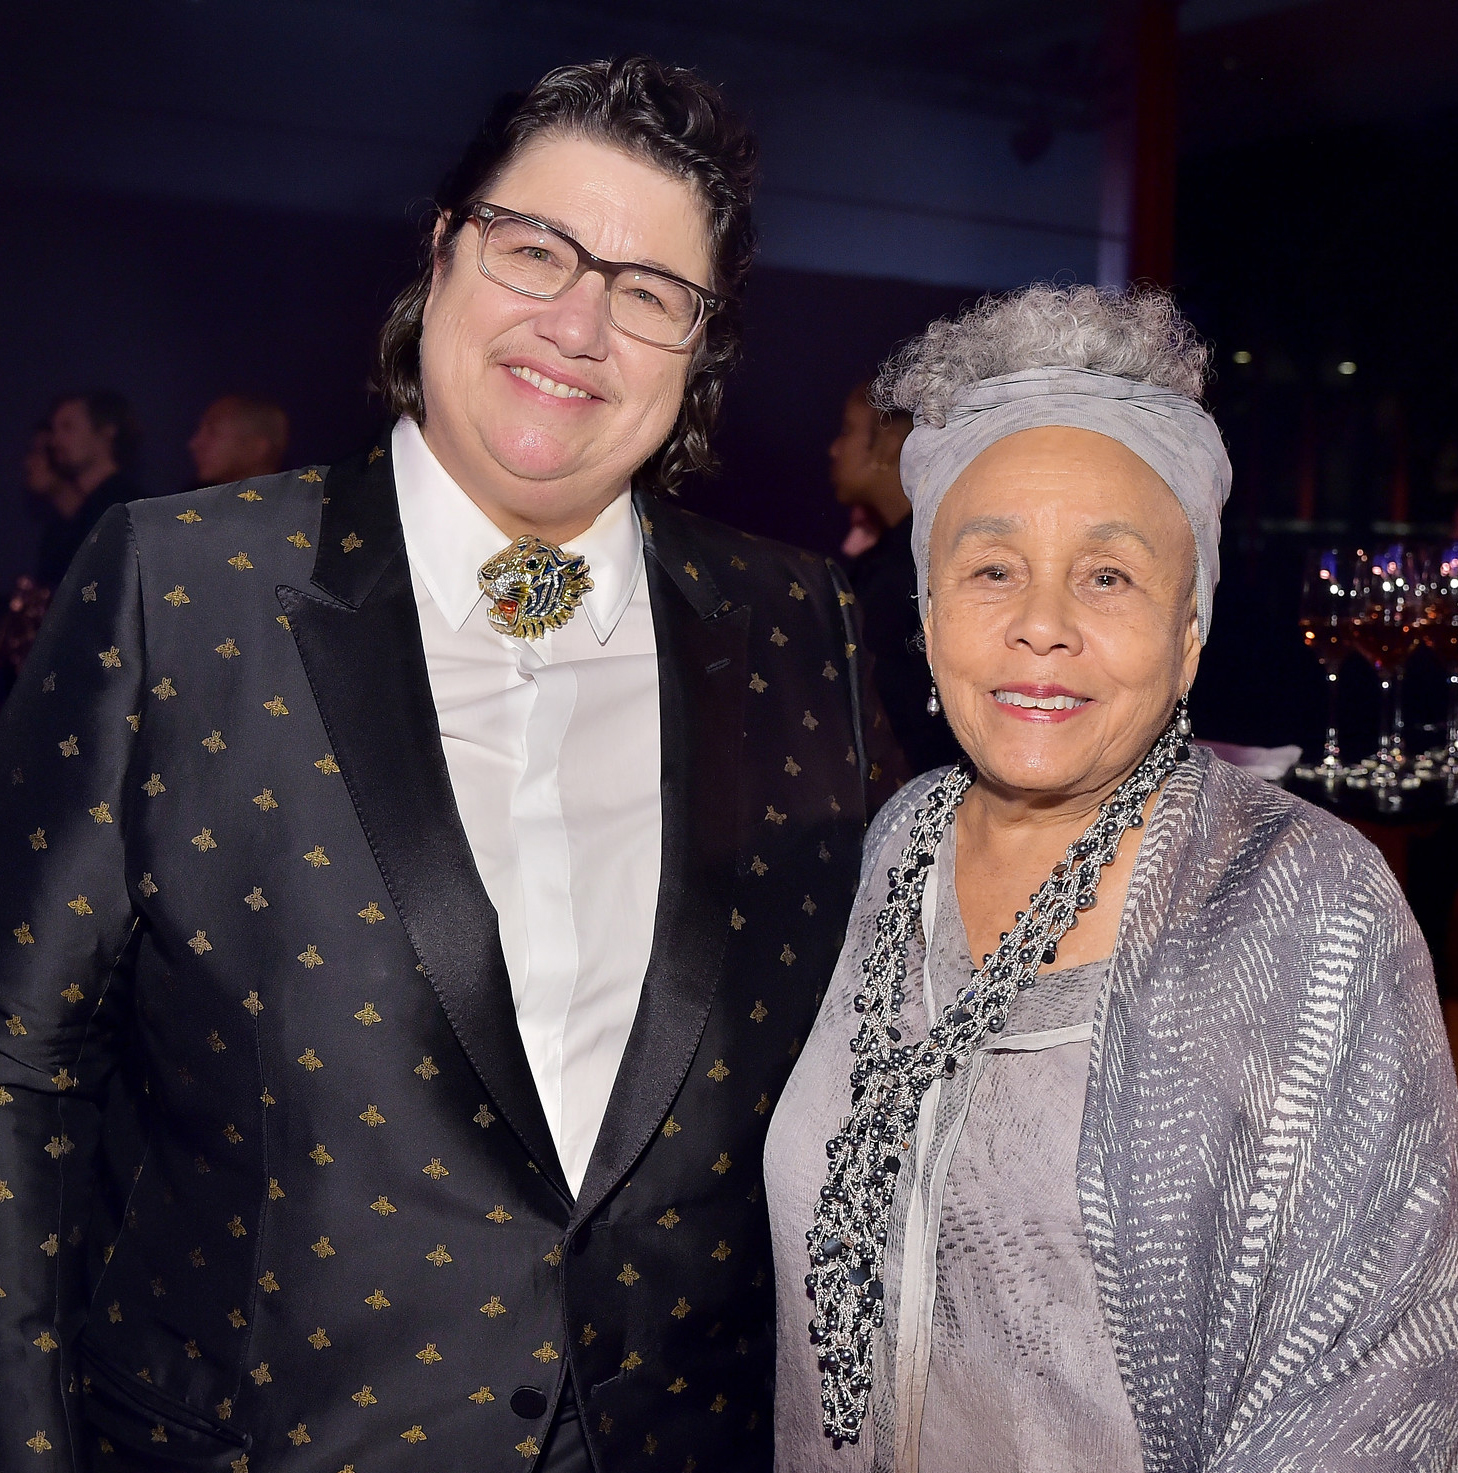 Honoree Catherine Opie and Betye Saar attend 2018 LACMA Art + Film Gala honoring Catherine Opie and Guillermo del Toro on November 3, 2018, photo Getty Images for LACMA by Stefanie Keenan